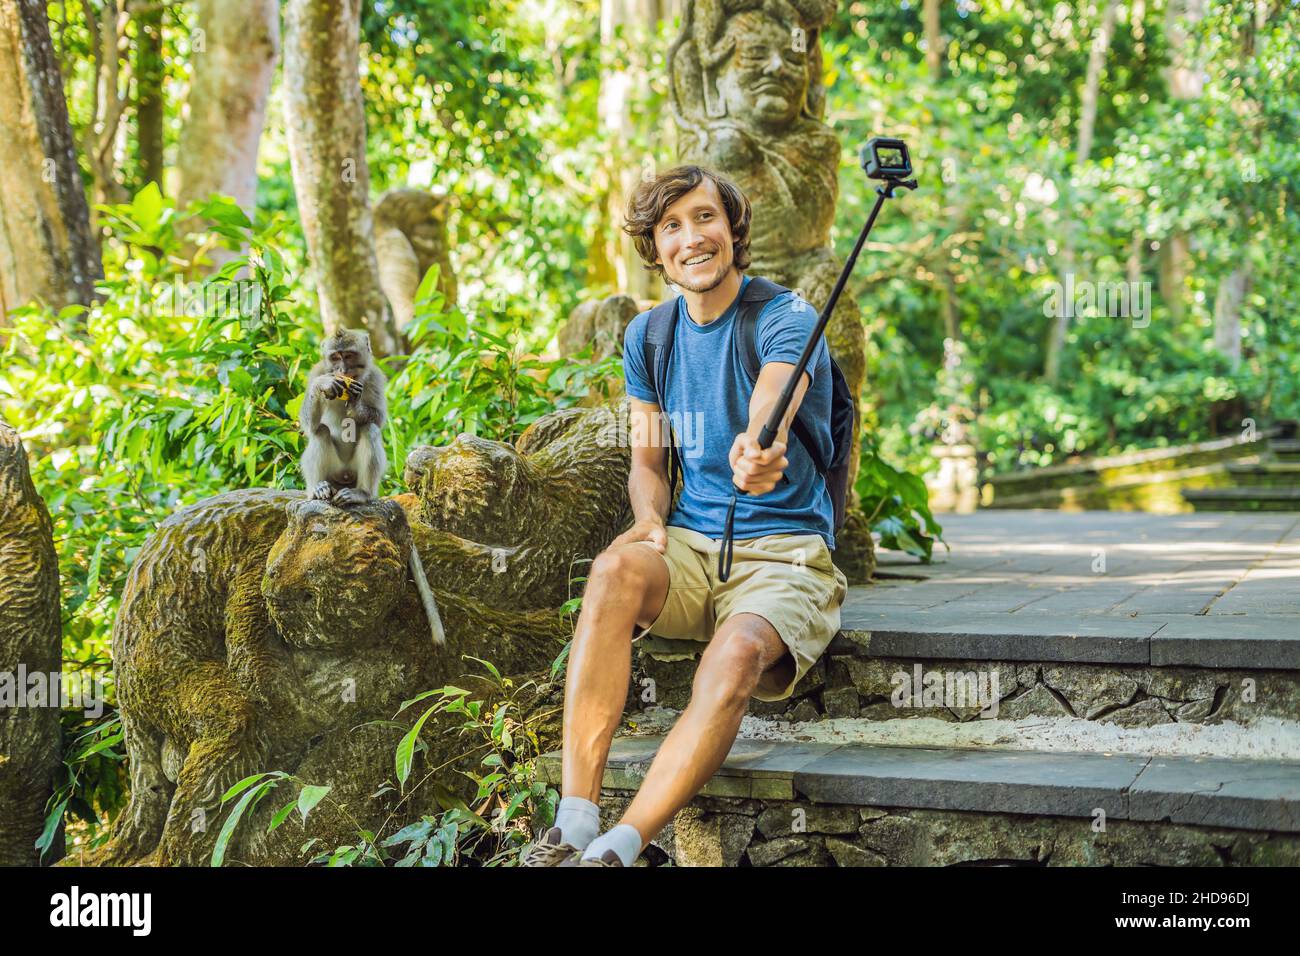 Selfie with monkeys. Young man uses a selfie stick to photo or video blog cute funny monkey. Travel selfie with wildlife in Bali Stock Photo - Alamy